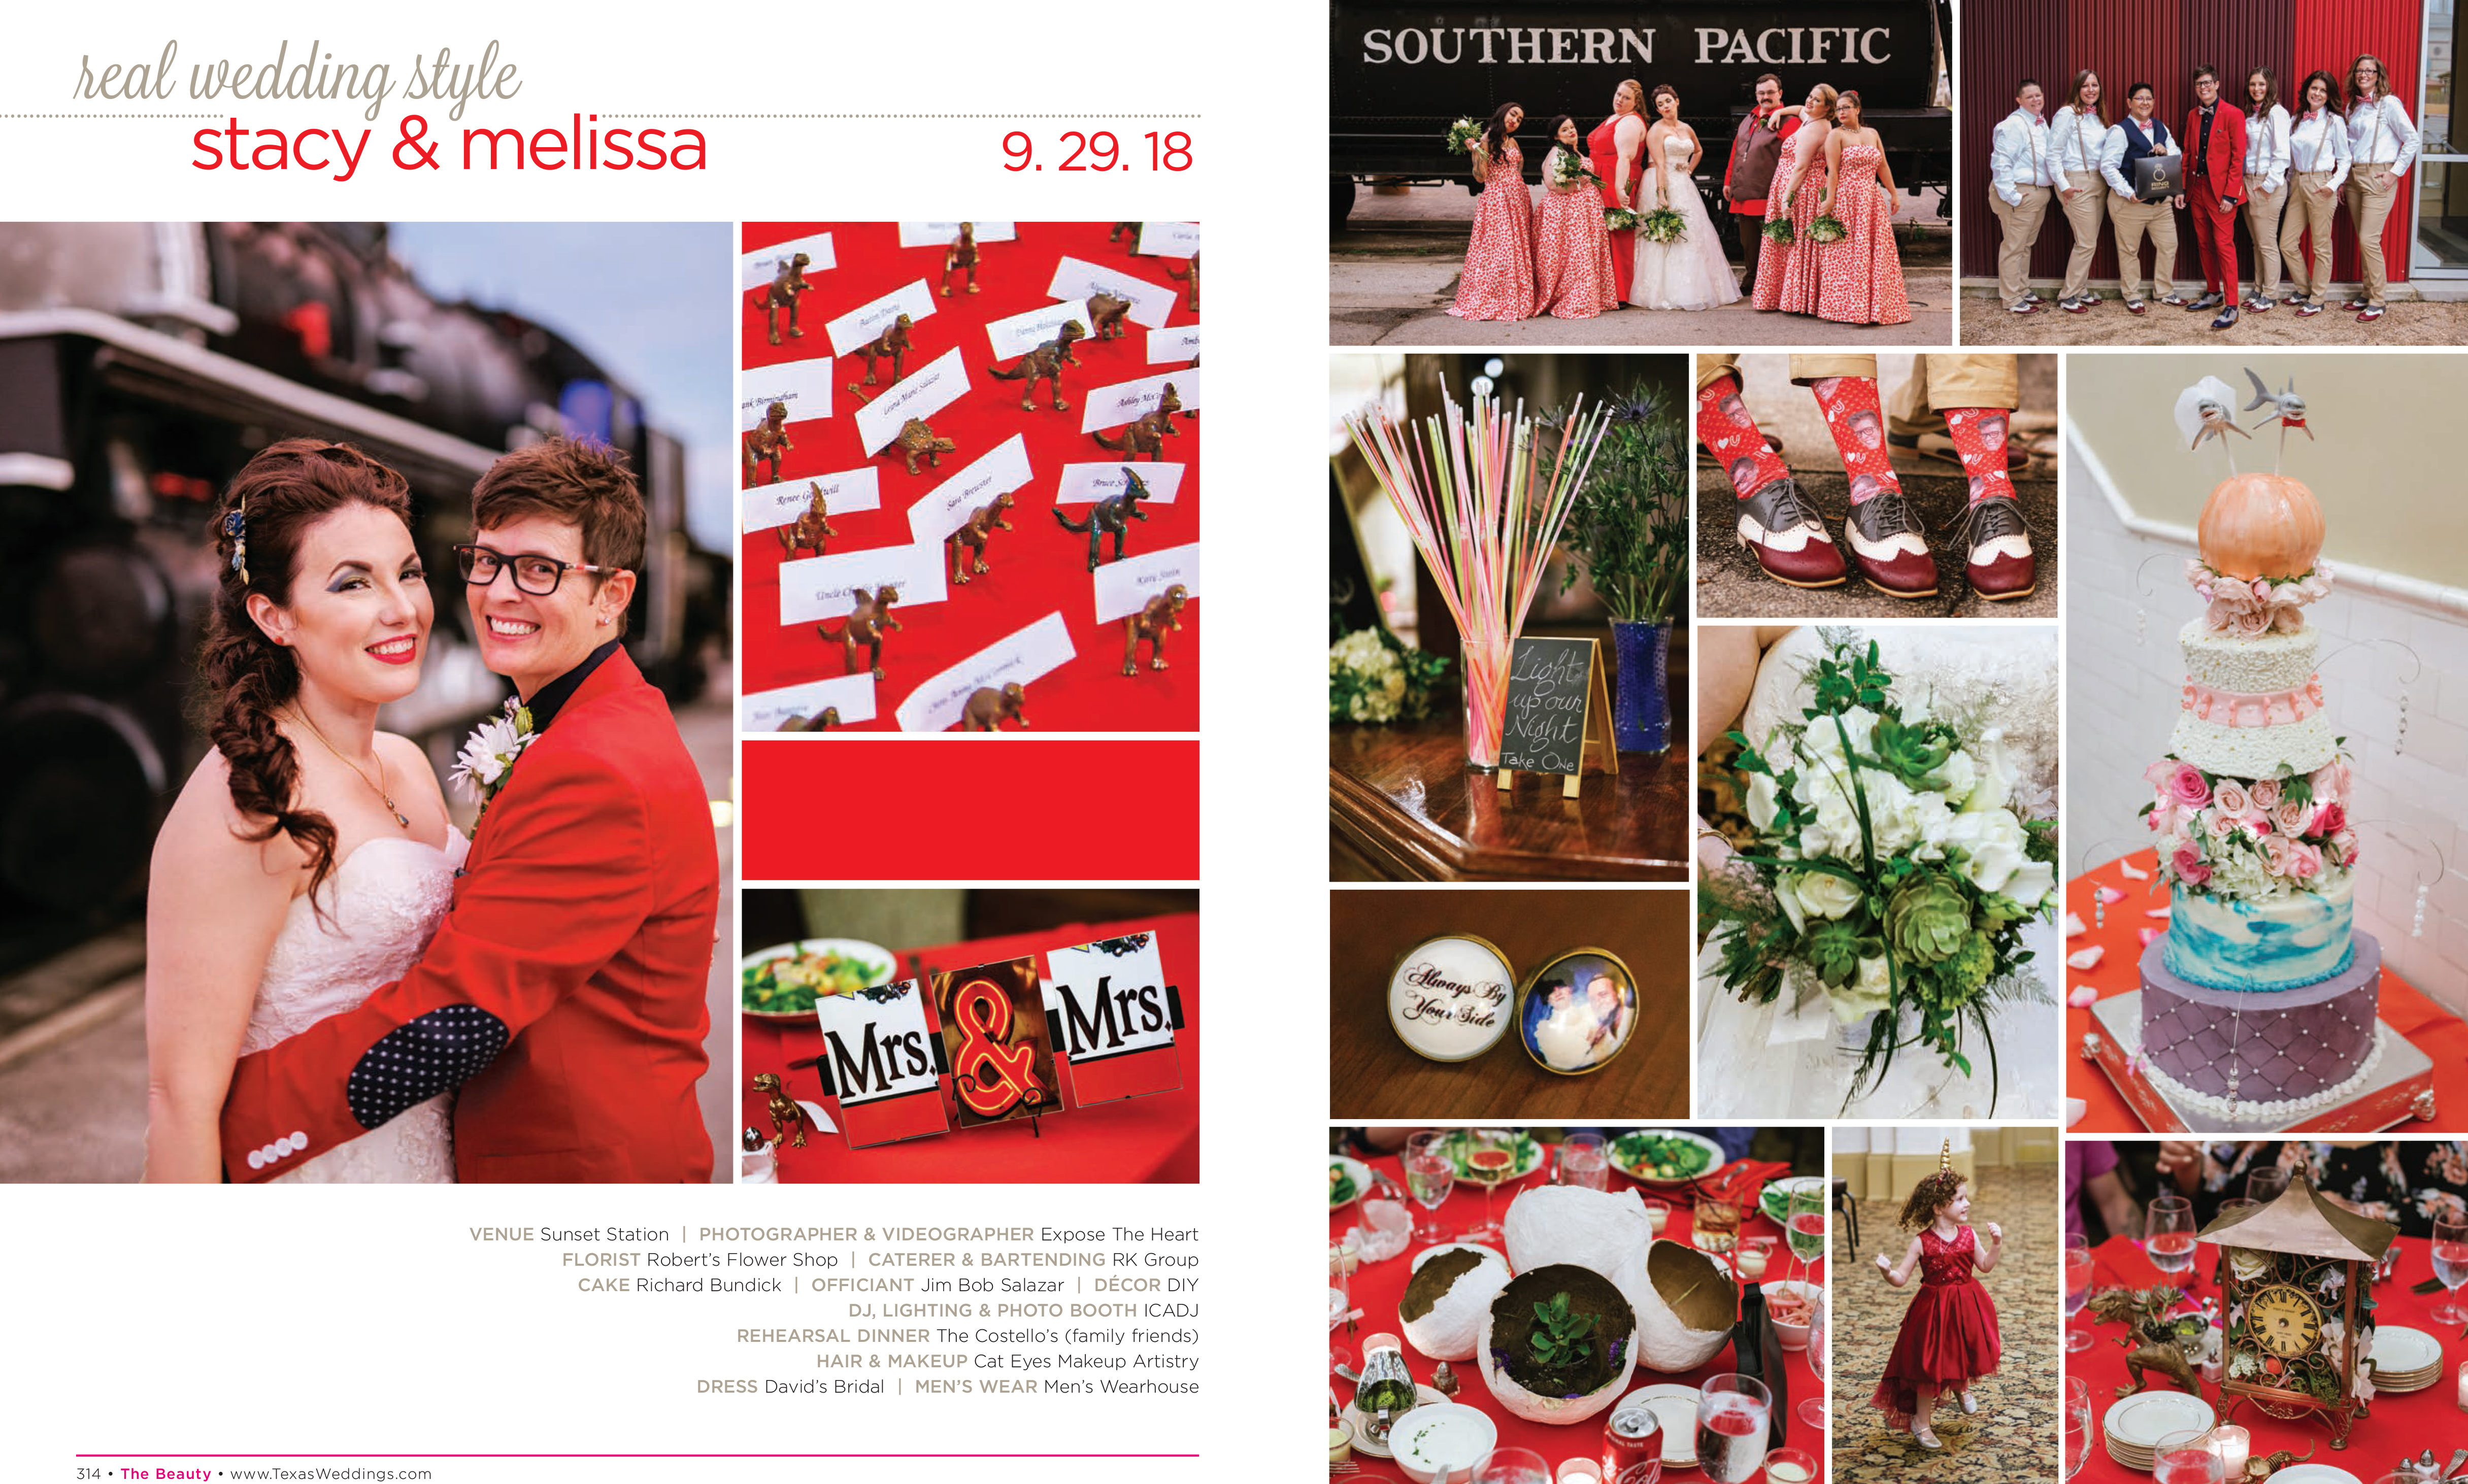 Stacy & Melissa in their Real Wedding Page in the Spring/Summer 2019 Texas Wedding Guide